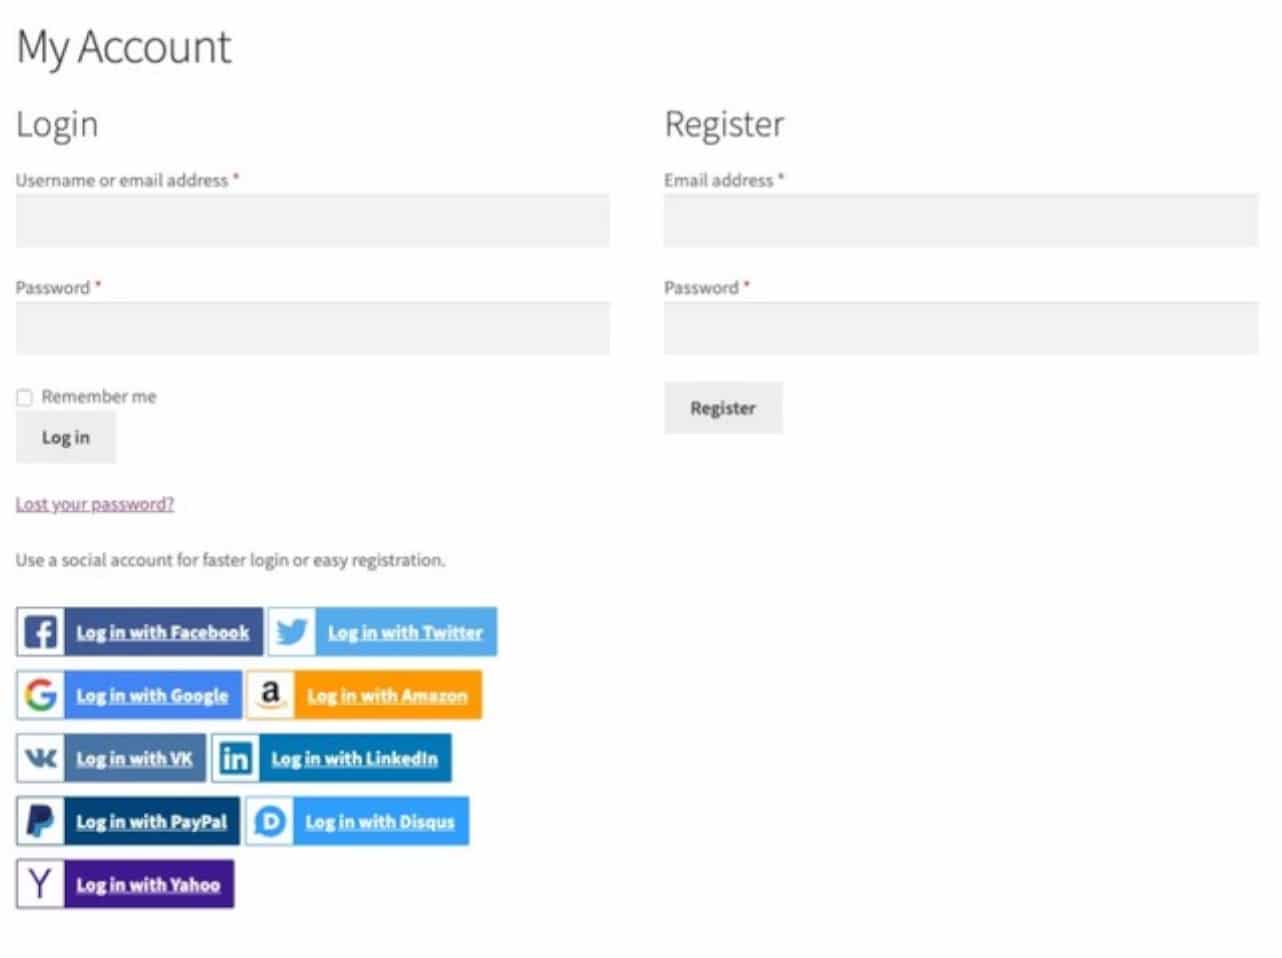 Social login makes it easy for your customers to create a new account.